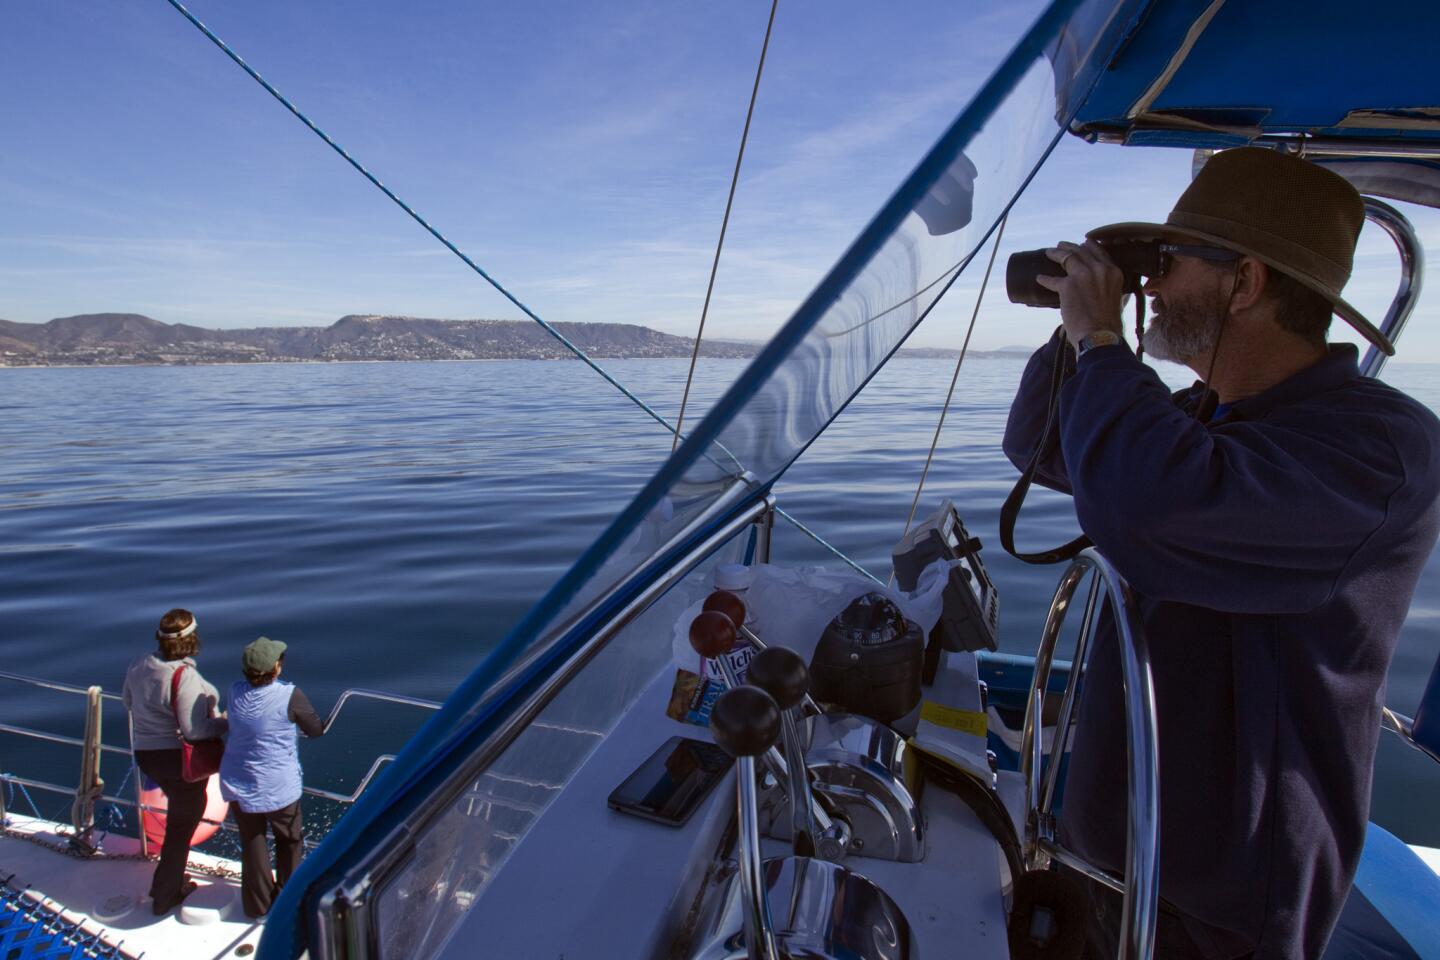 Captain Dave Anderson uses binoculars to spot migrating whales, as tourists also keep watch aboard Anderson's Dolphin and Whale Safari 35-foot catamaran off Dana Point.